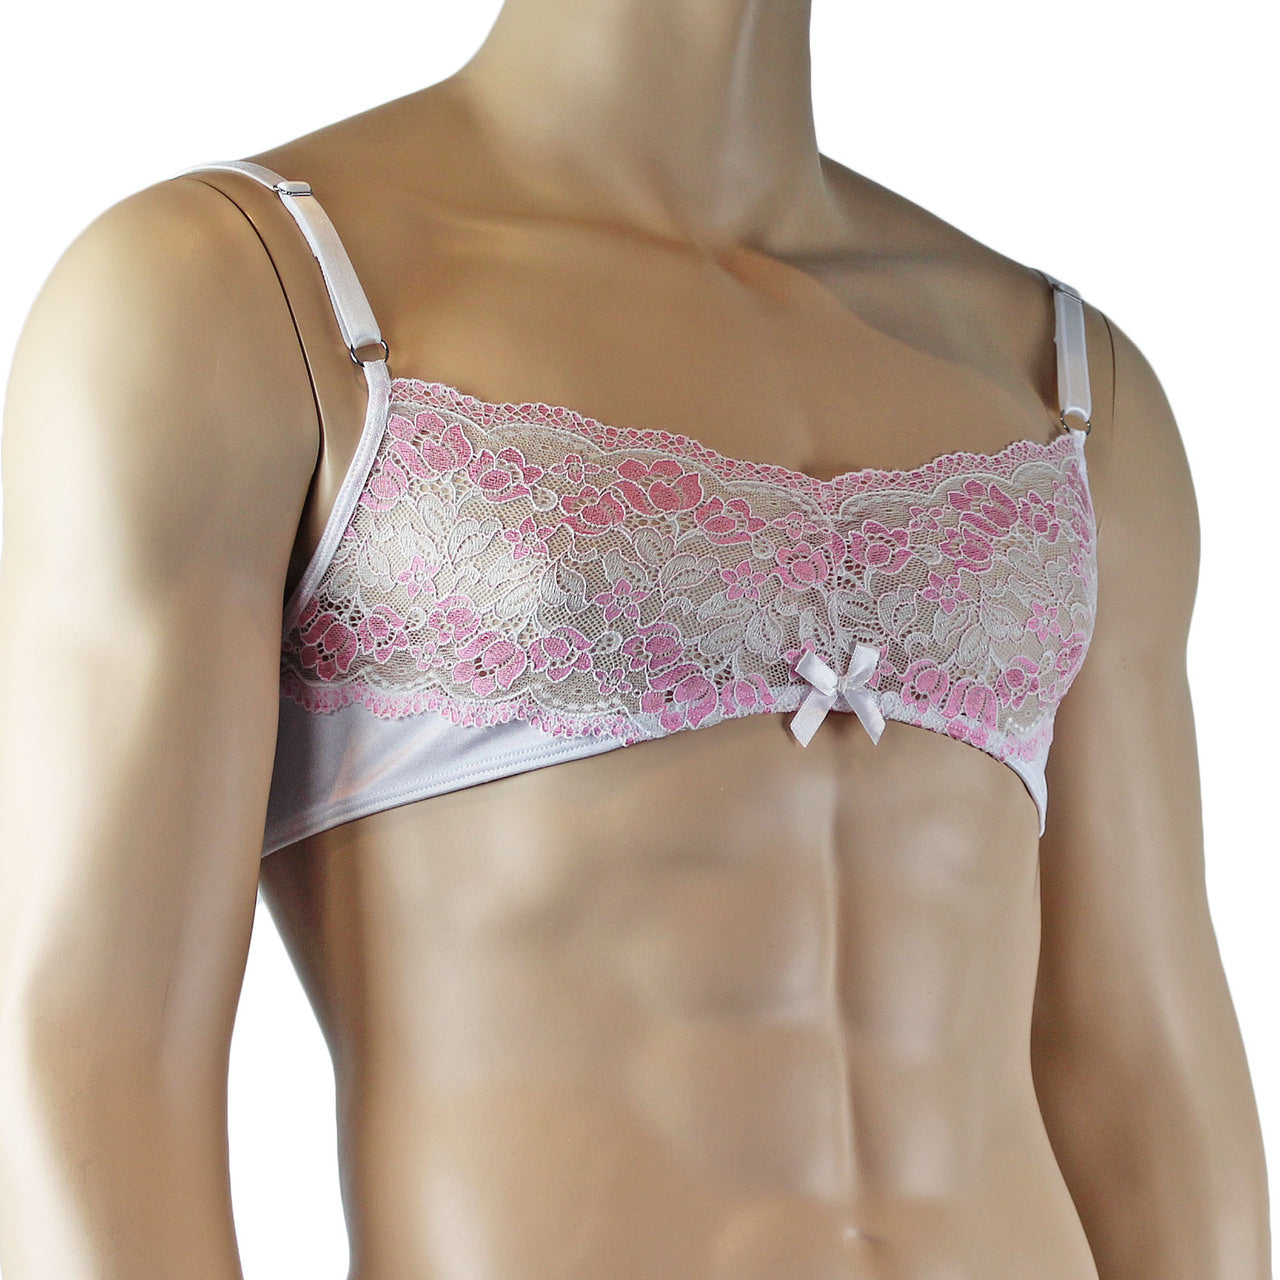 Mens Luxury Bra Top with Beautiful Lace Male Lingerie White